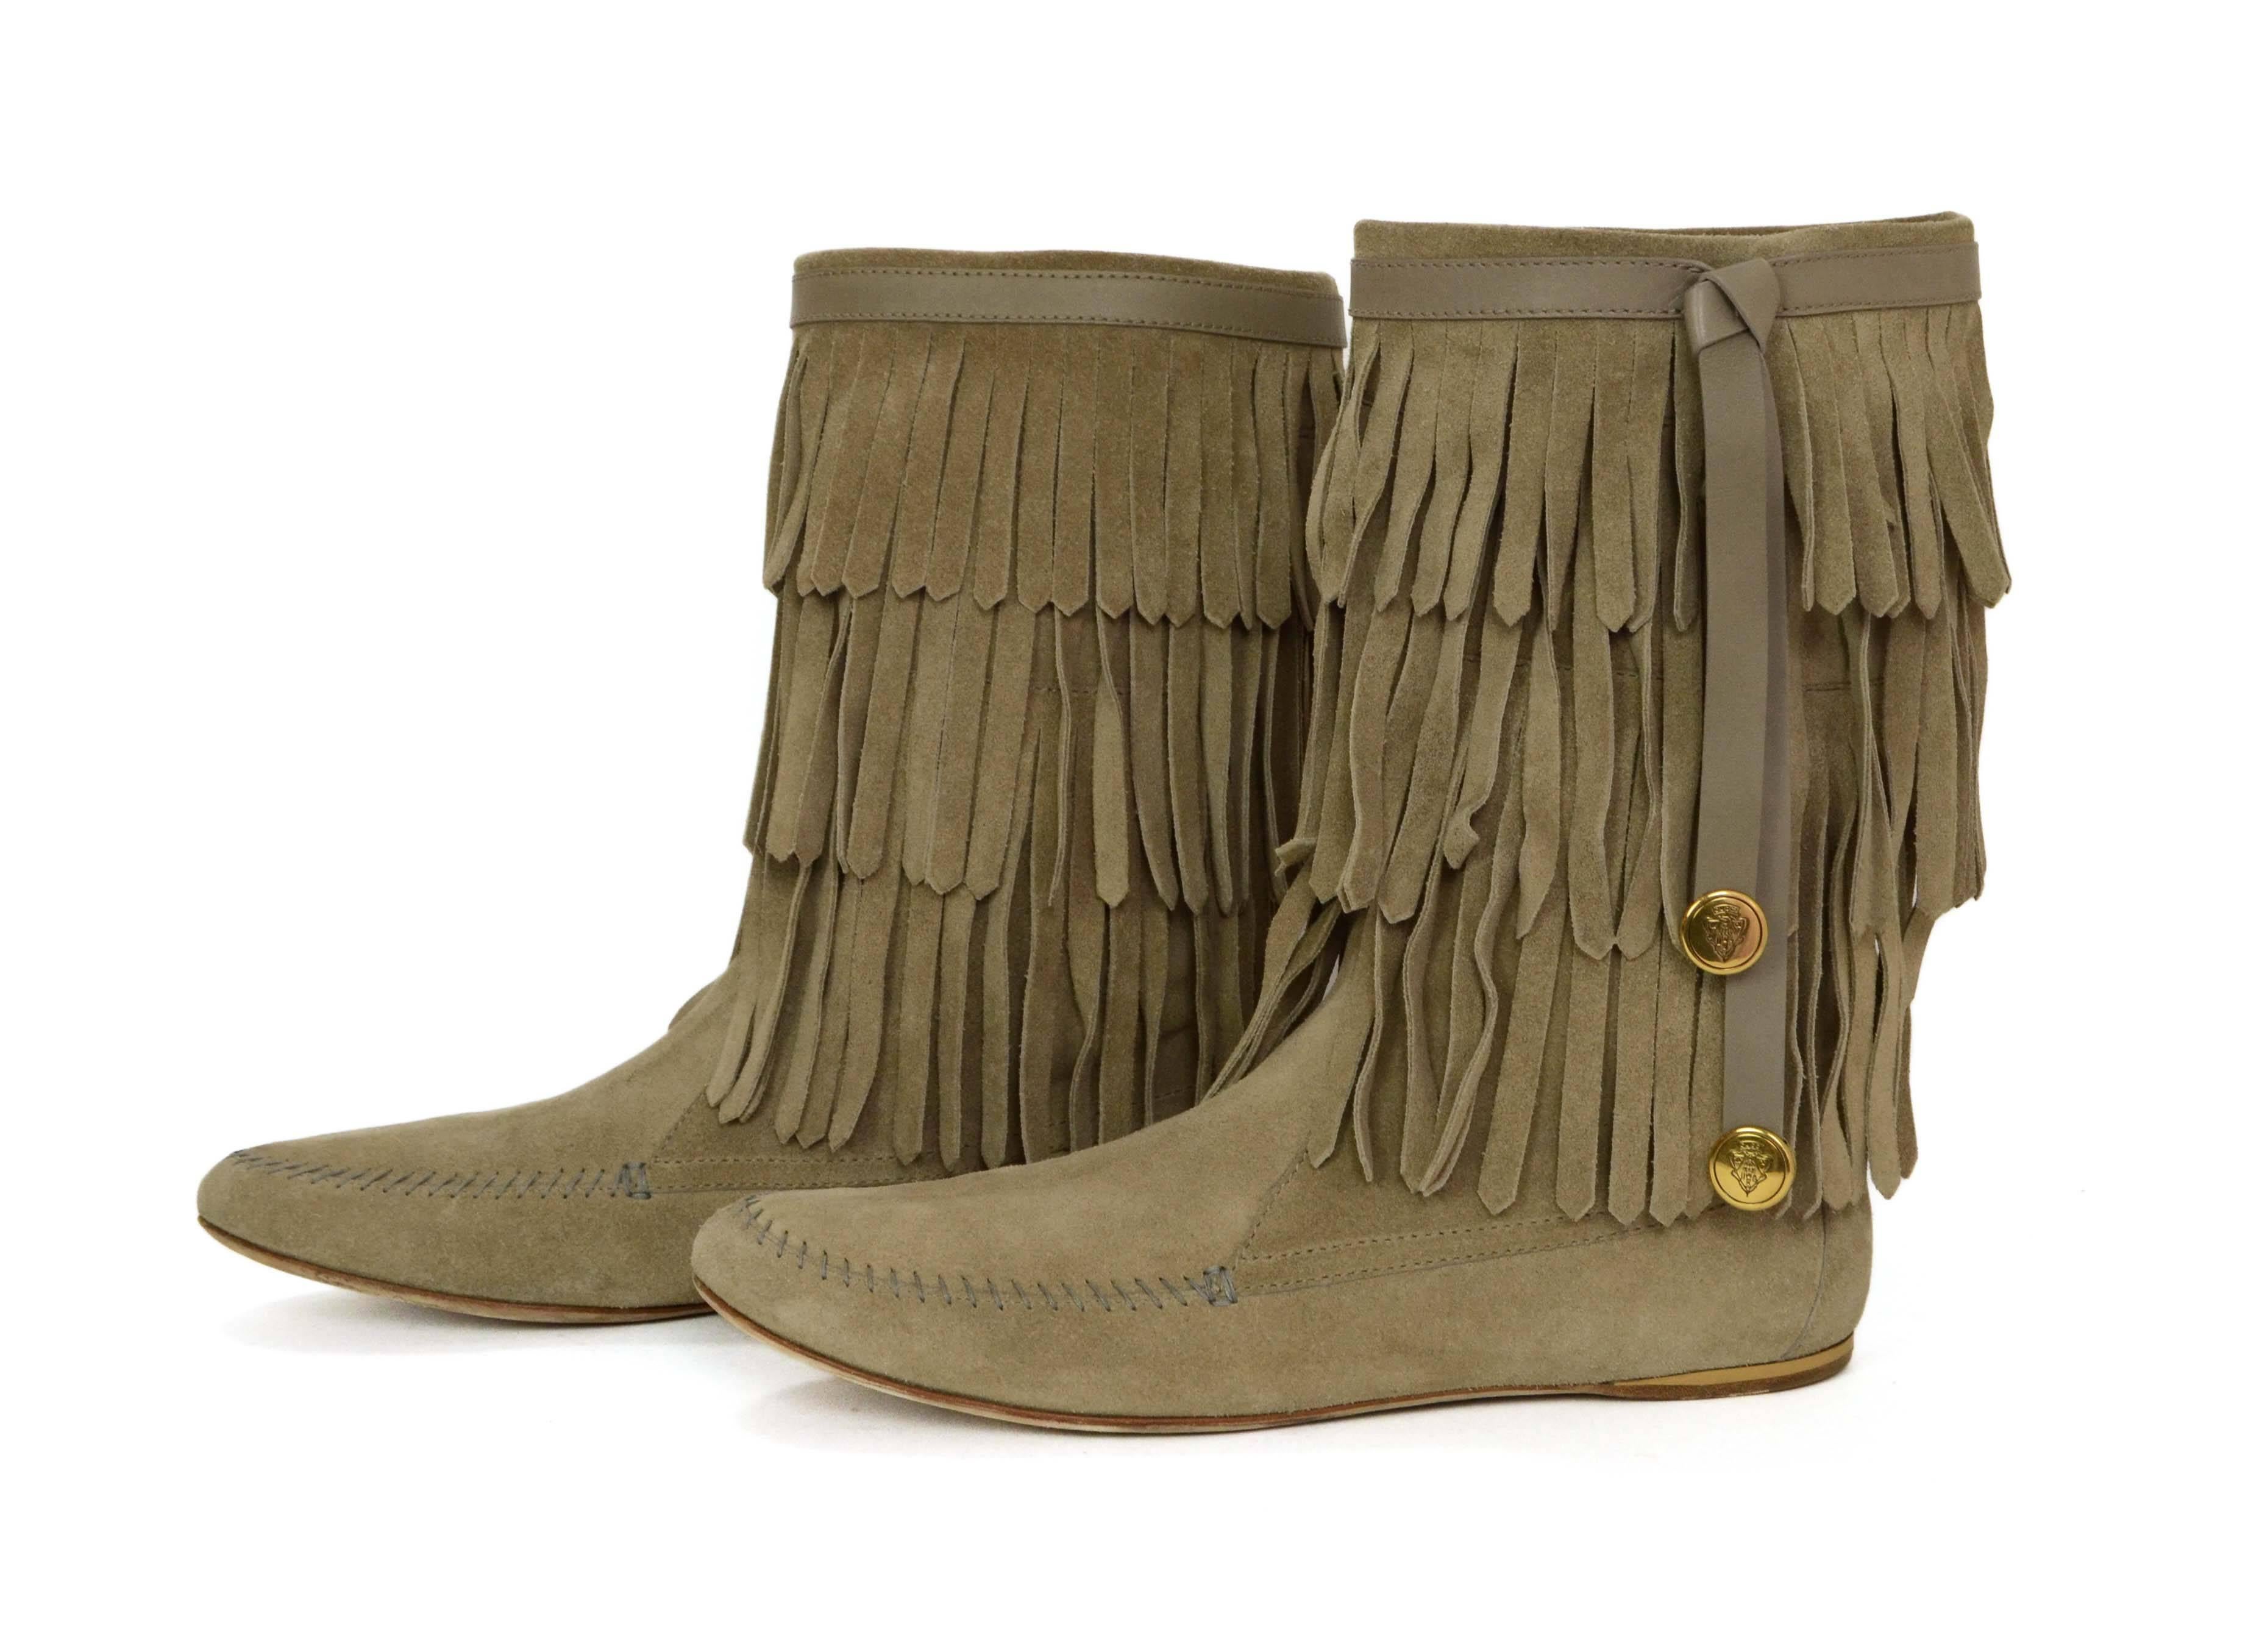 Gucci Beige Suede Fringe Boots 
Features leather tabs on boot top with goldtone coins attached and Gucci logo
Made In: Italy
Color: Beige
Materials: Suede
Closure/Opening: Pull on
Sole Stamp: Gucci Made in Italy 39C
Overall Condition: